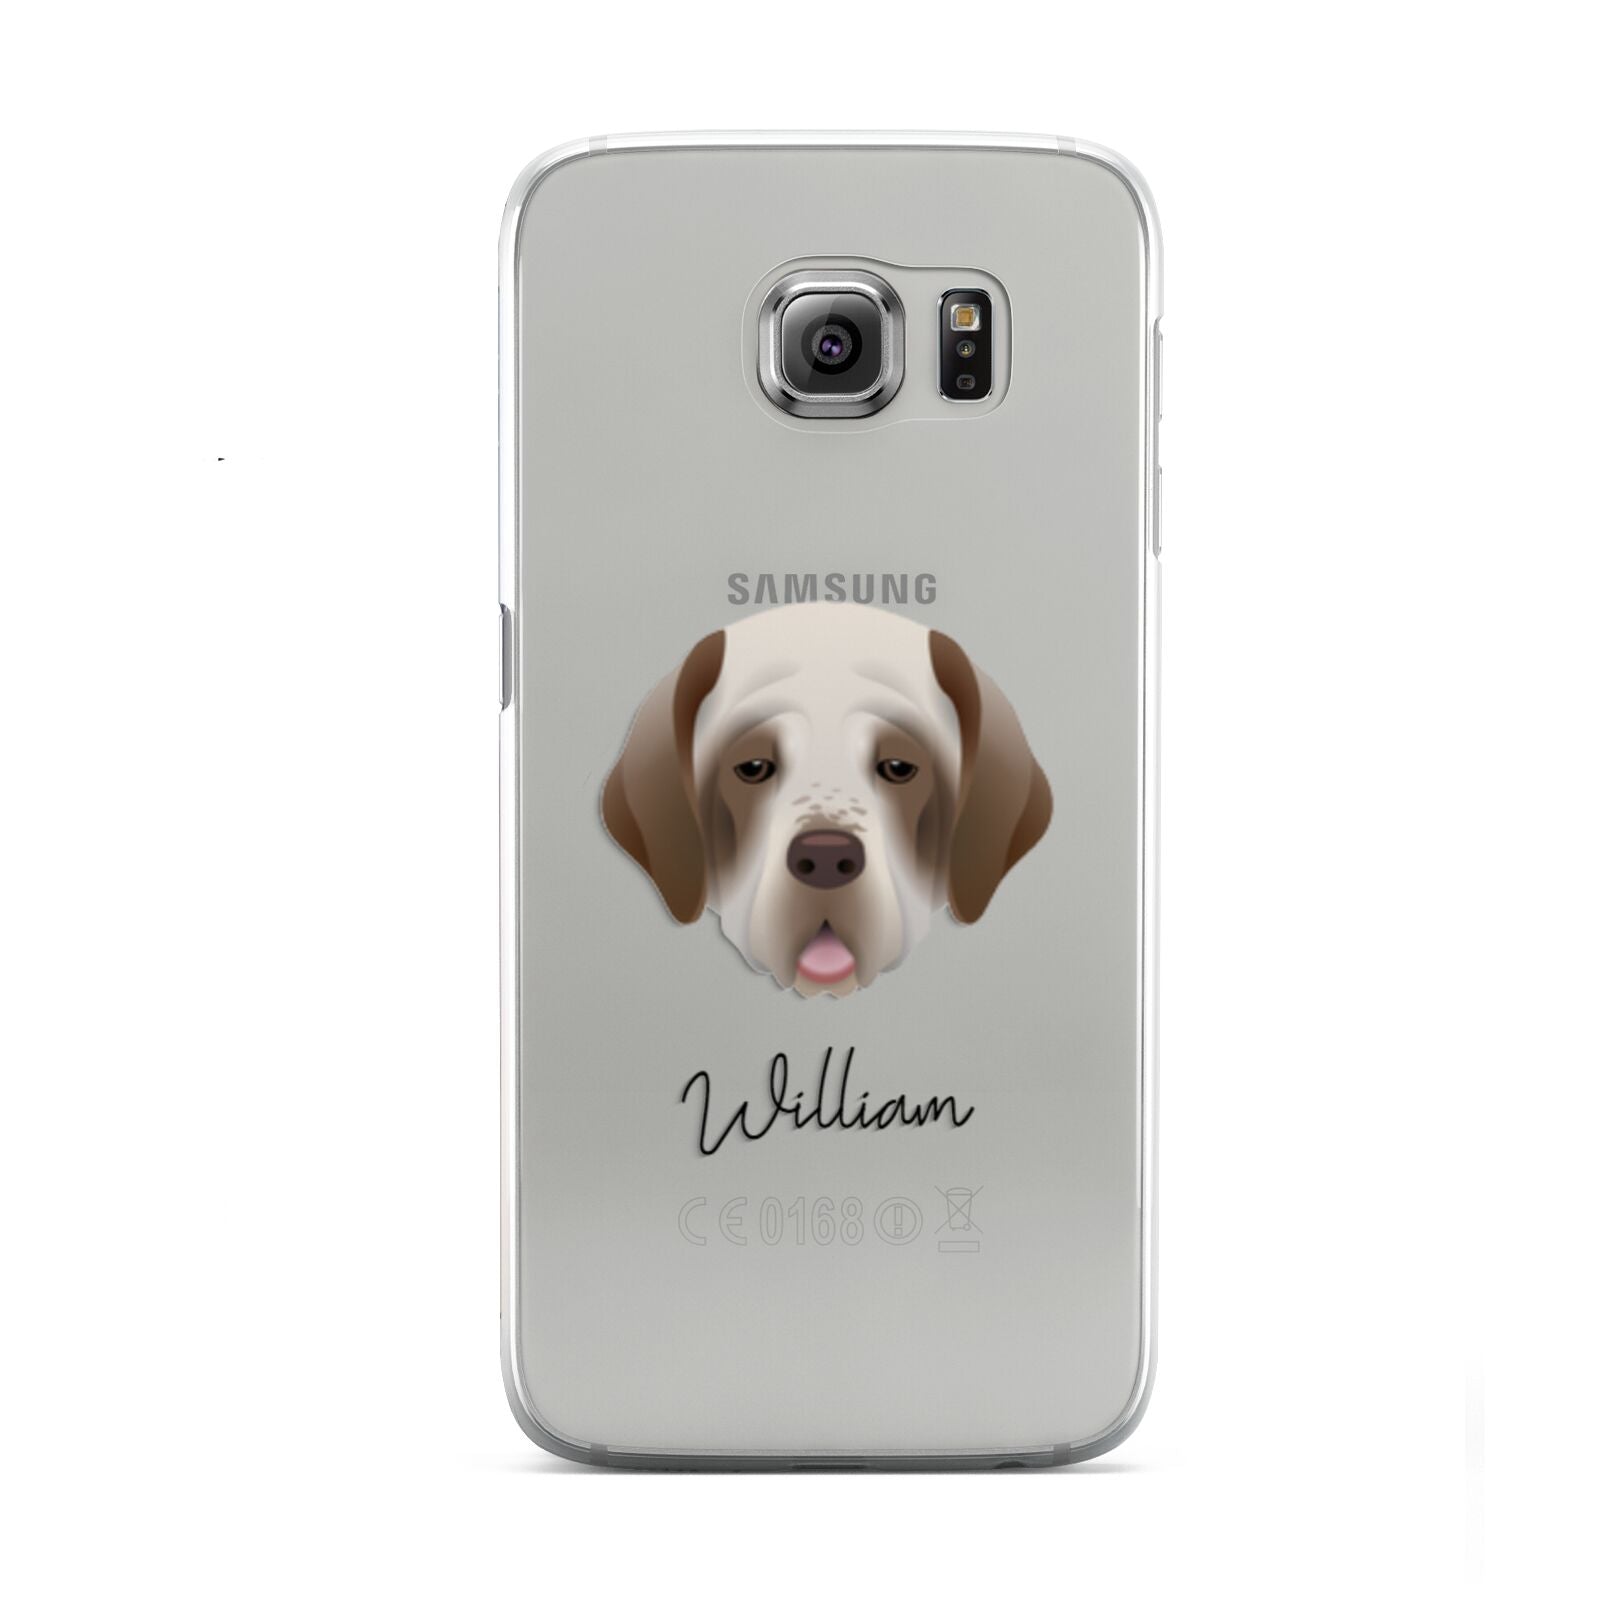 Clumber Spaniel Personalised Samsung Galaxy S6 Case